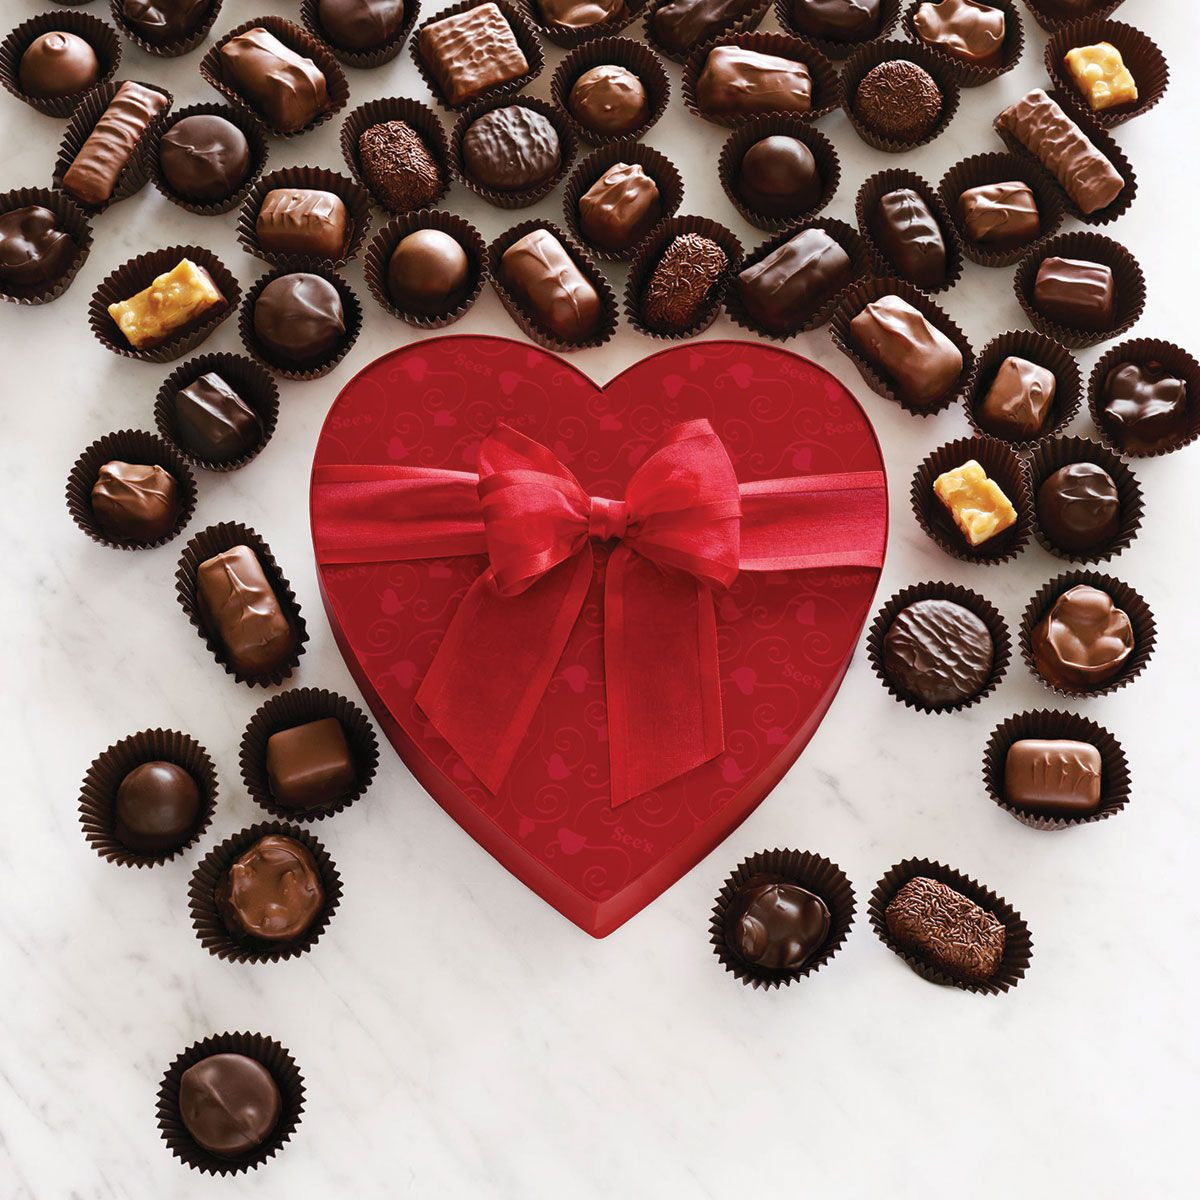 See'S Candy Valentines Day
 You can never go wrong with this much chocolate